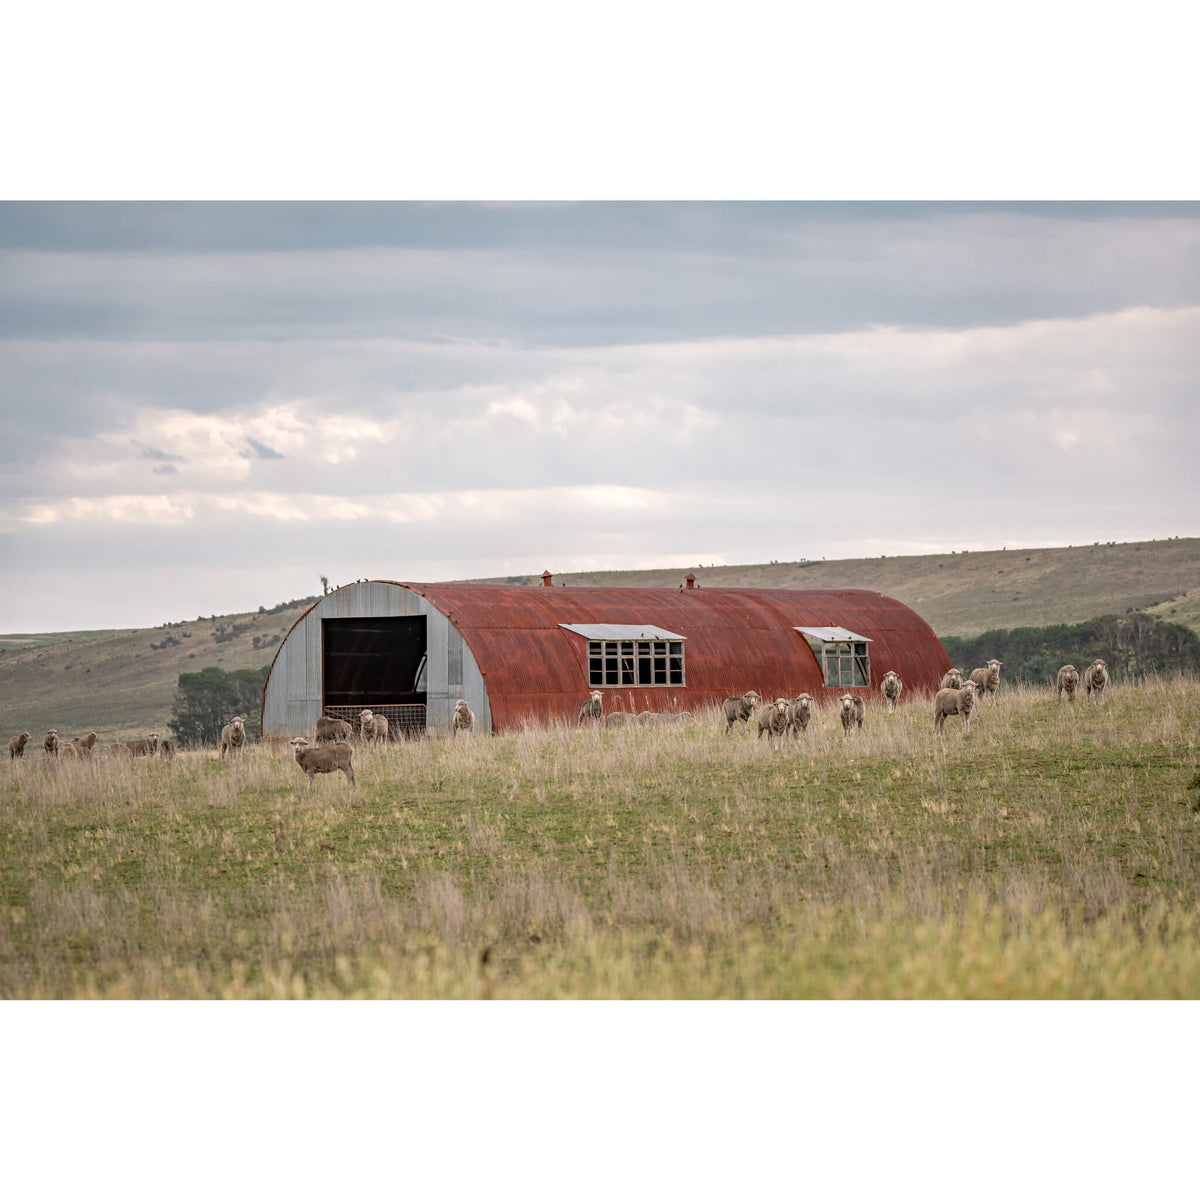 Nissen Hut Barn | A Place To Call Home Fine Art Print - Lost Collective Shop